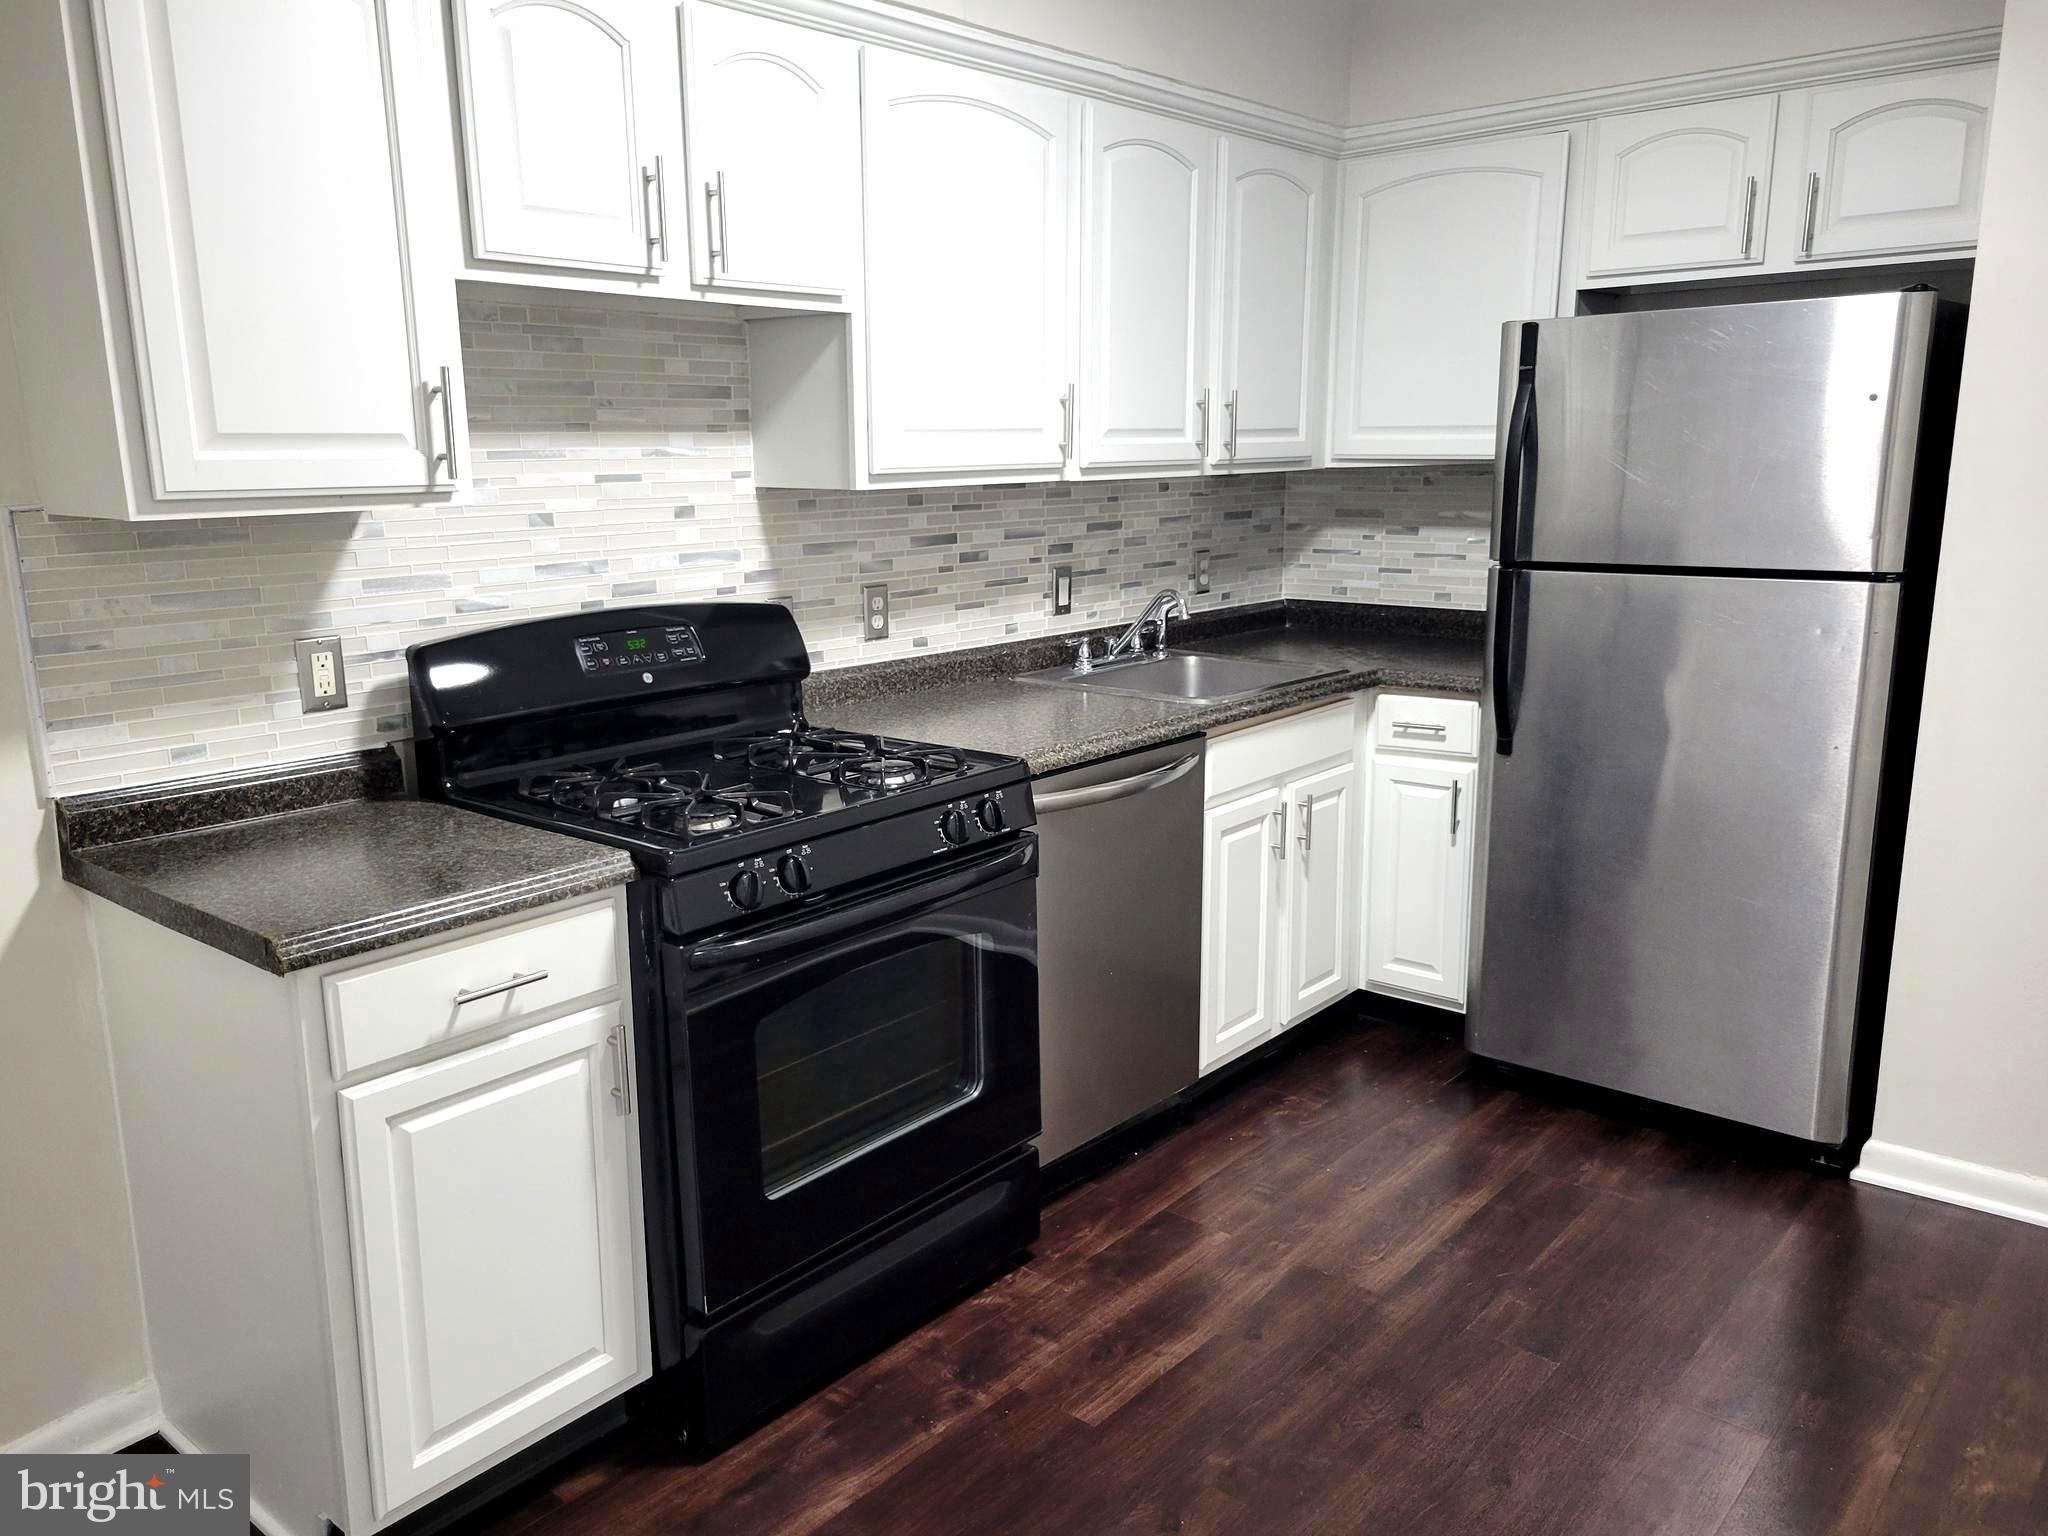 a kitchen with granite countertop wooden floors stainless steel appliances and white cabinets